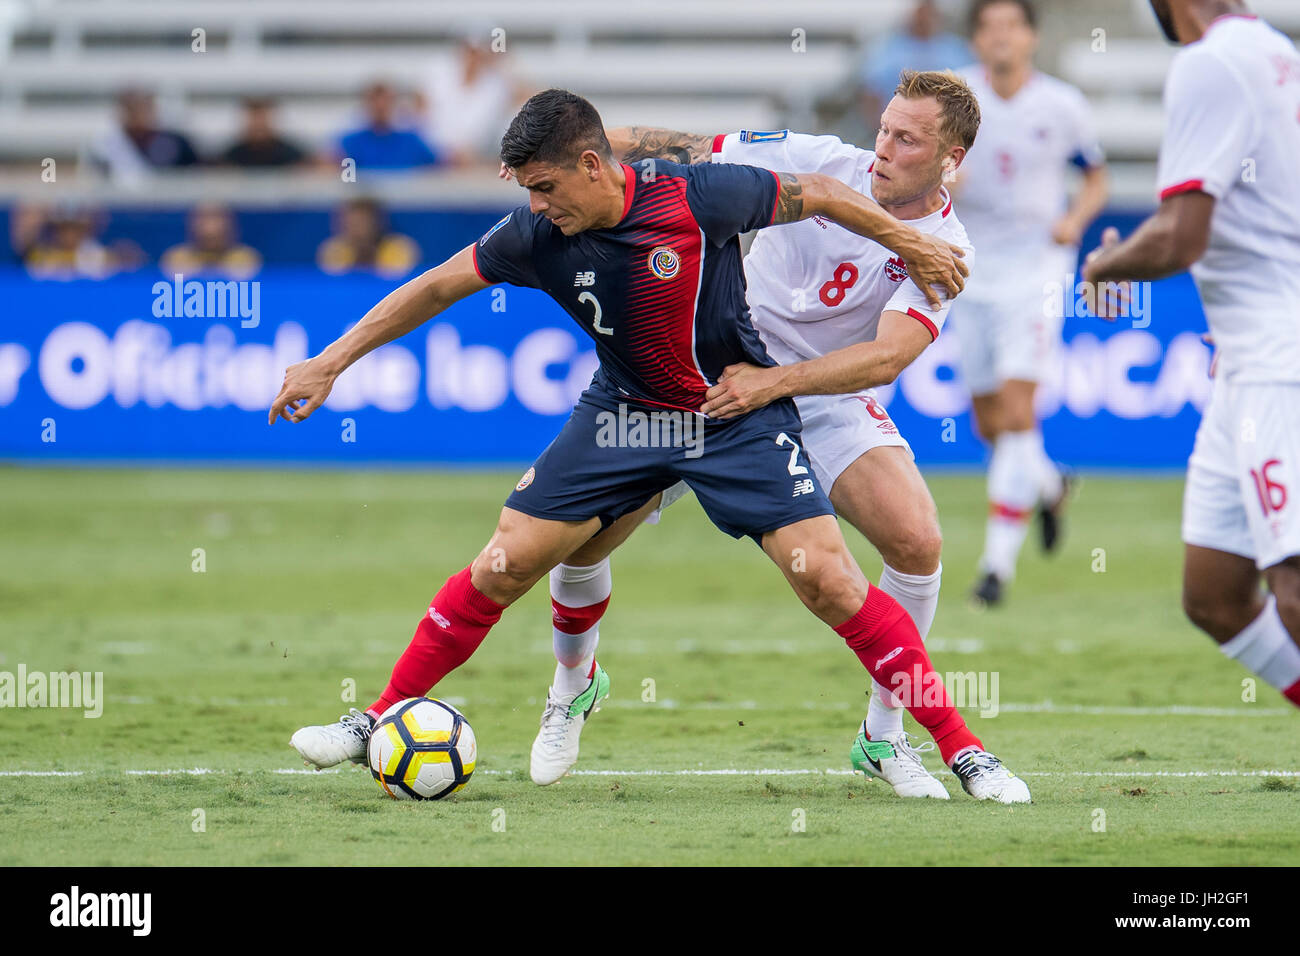 Houston, Texas, USA. 11th July, 2017. Costa Rica defender Johnny Acosta (2) and Canada midfielder Scott Arfield (8) battle for the ball during the 1st half of an international CONCACAF Gold Cup soccer match between Canada and Costa Rica at BBVA Compass Stadium in Houston, TX on July 11th, 2017. The game ended in a 1-1 draw. Credit: Trask Smith/ZUMA Wire/Alamy Live News Stock Photo